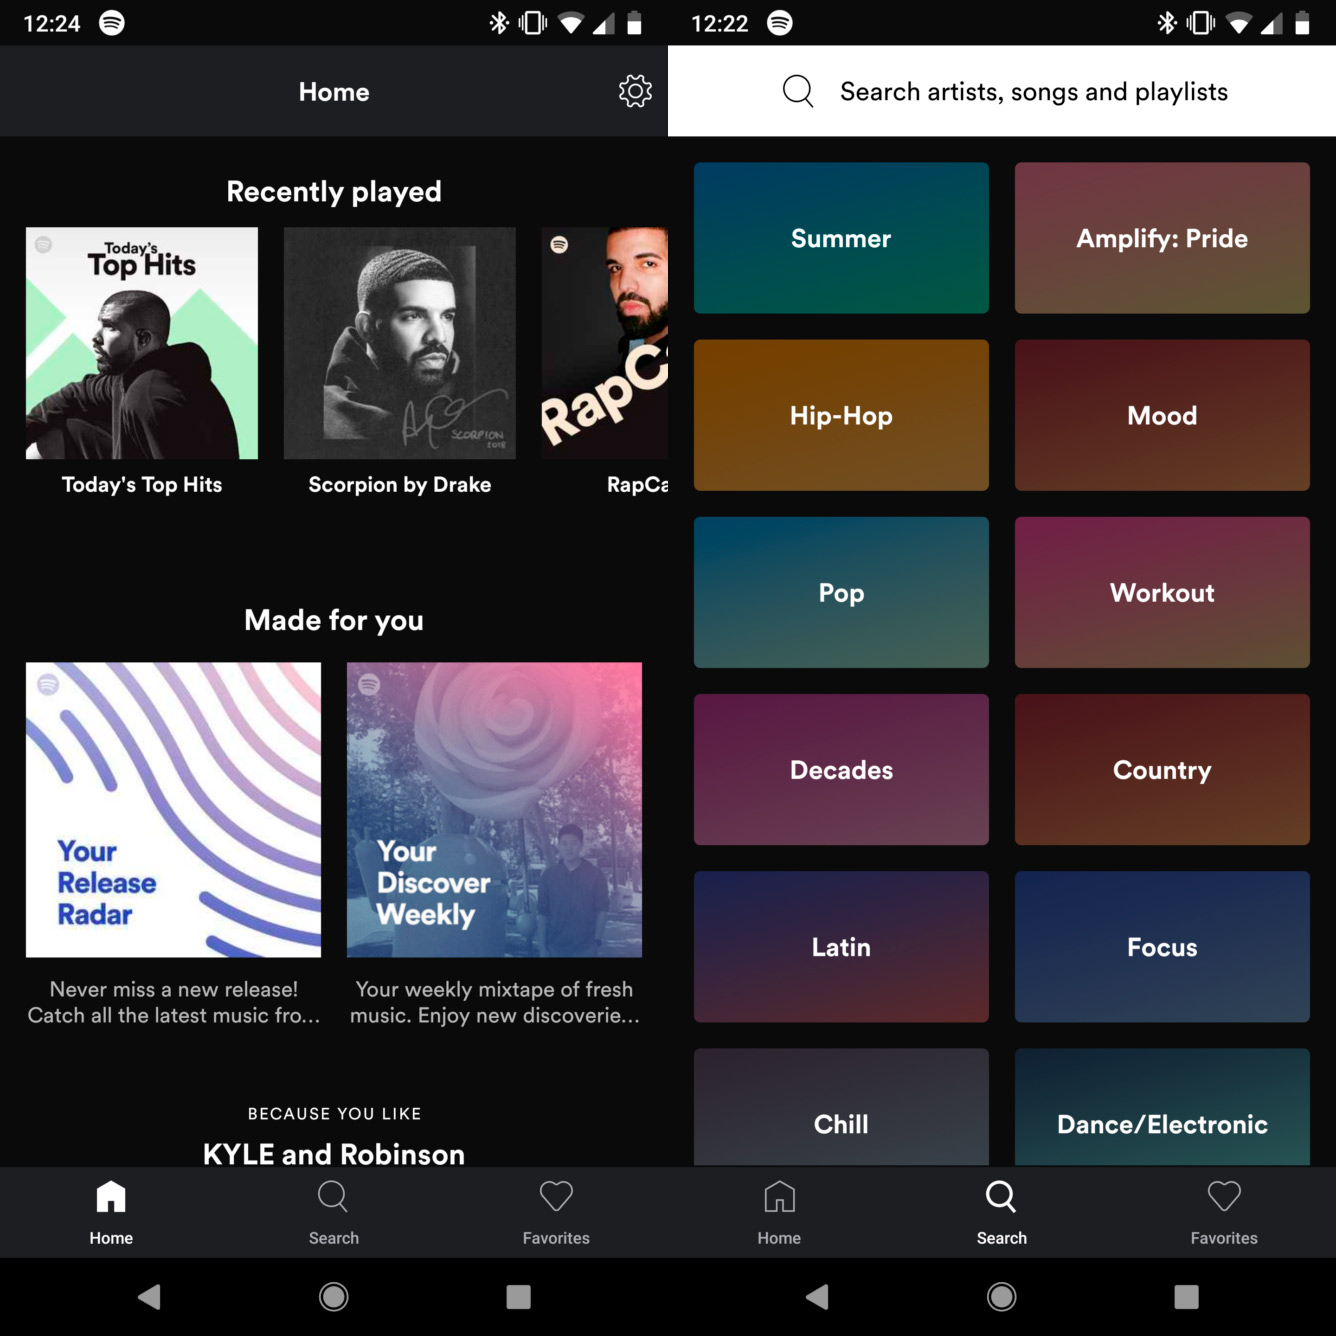 Download Spotify Lite and listen to music without taking up much space